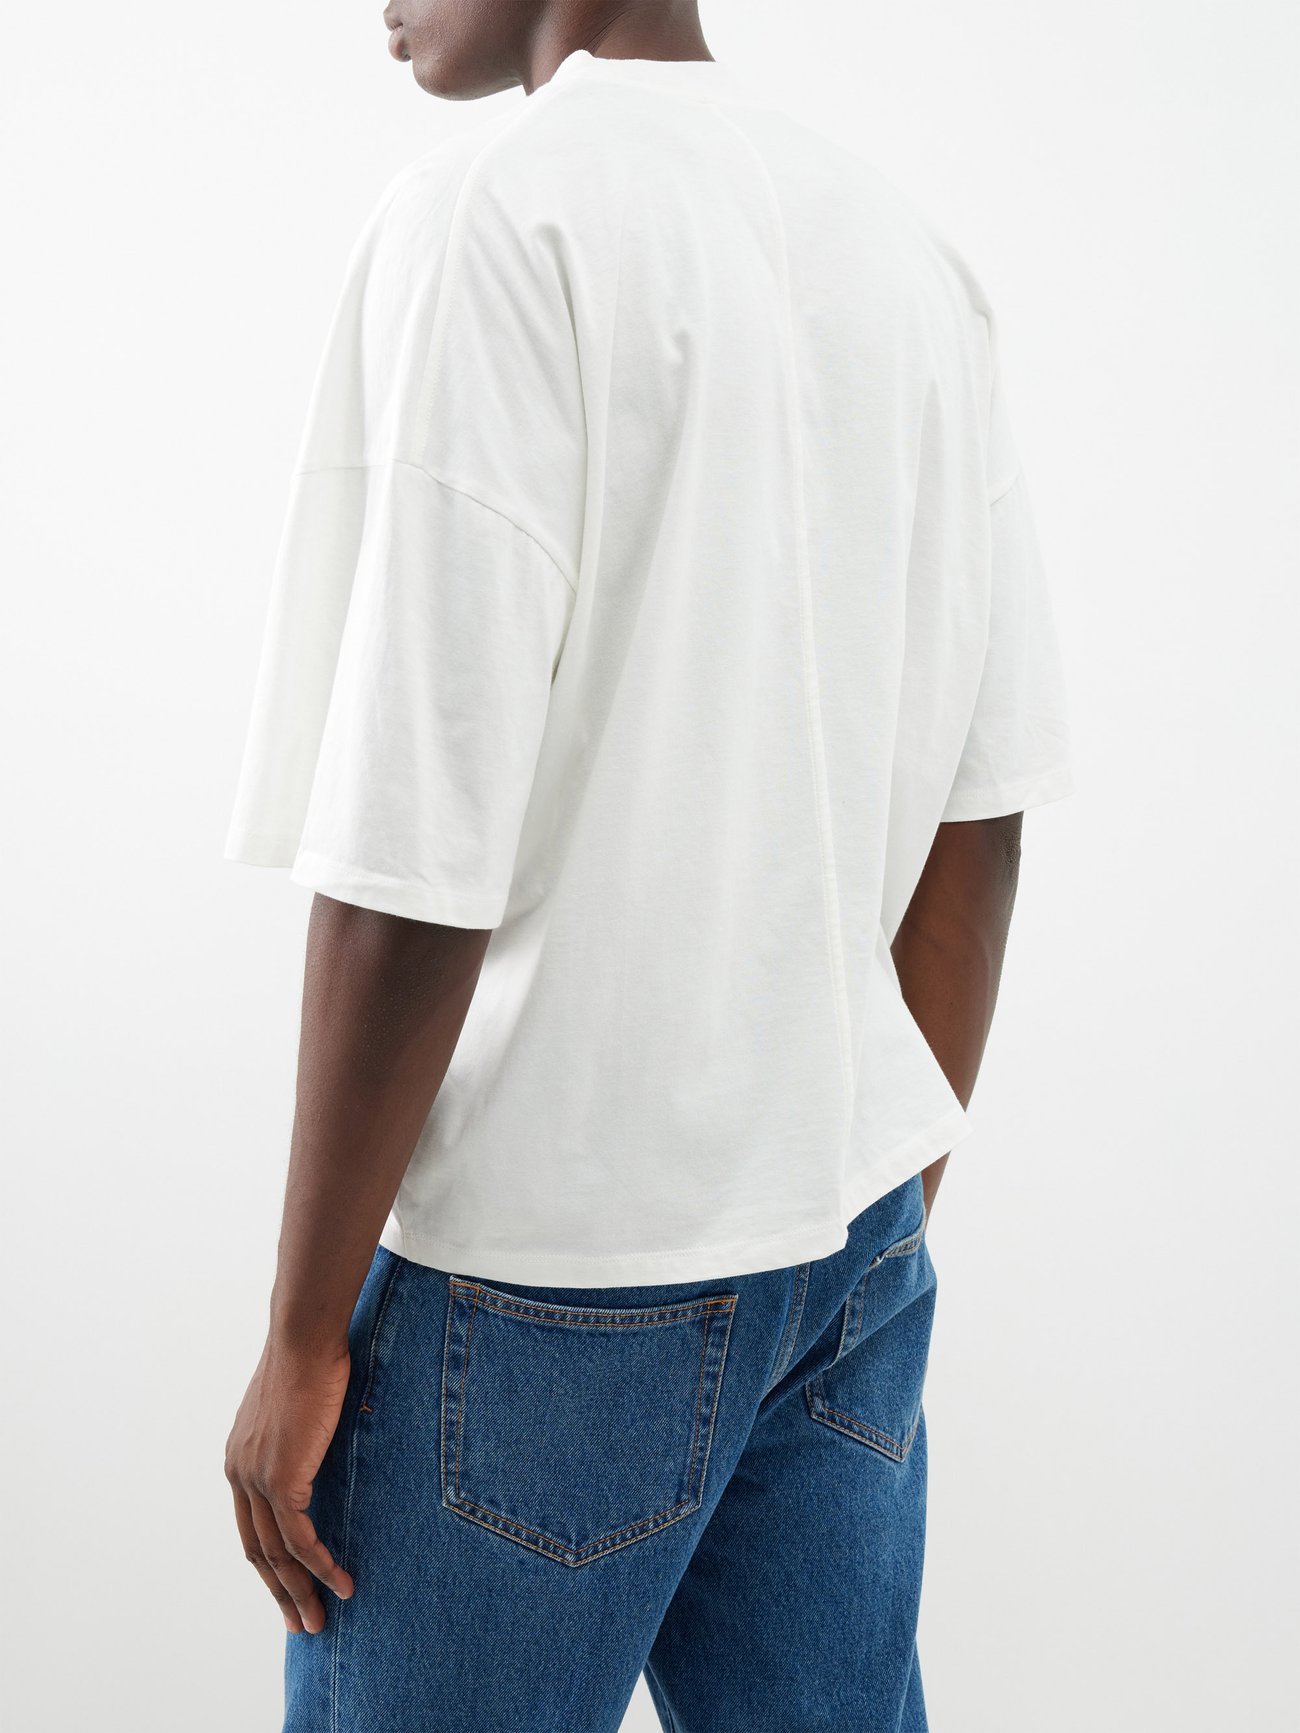 White Dustin dropped-shoulder jersey T-shirt | The Row